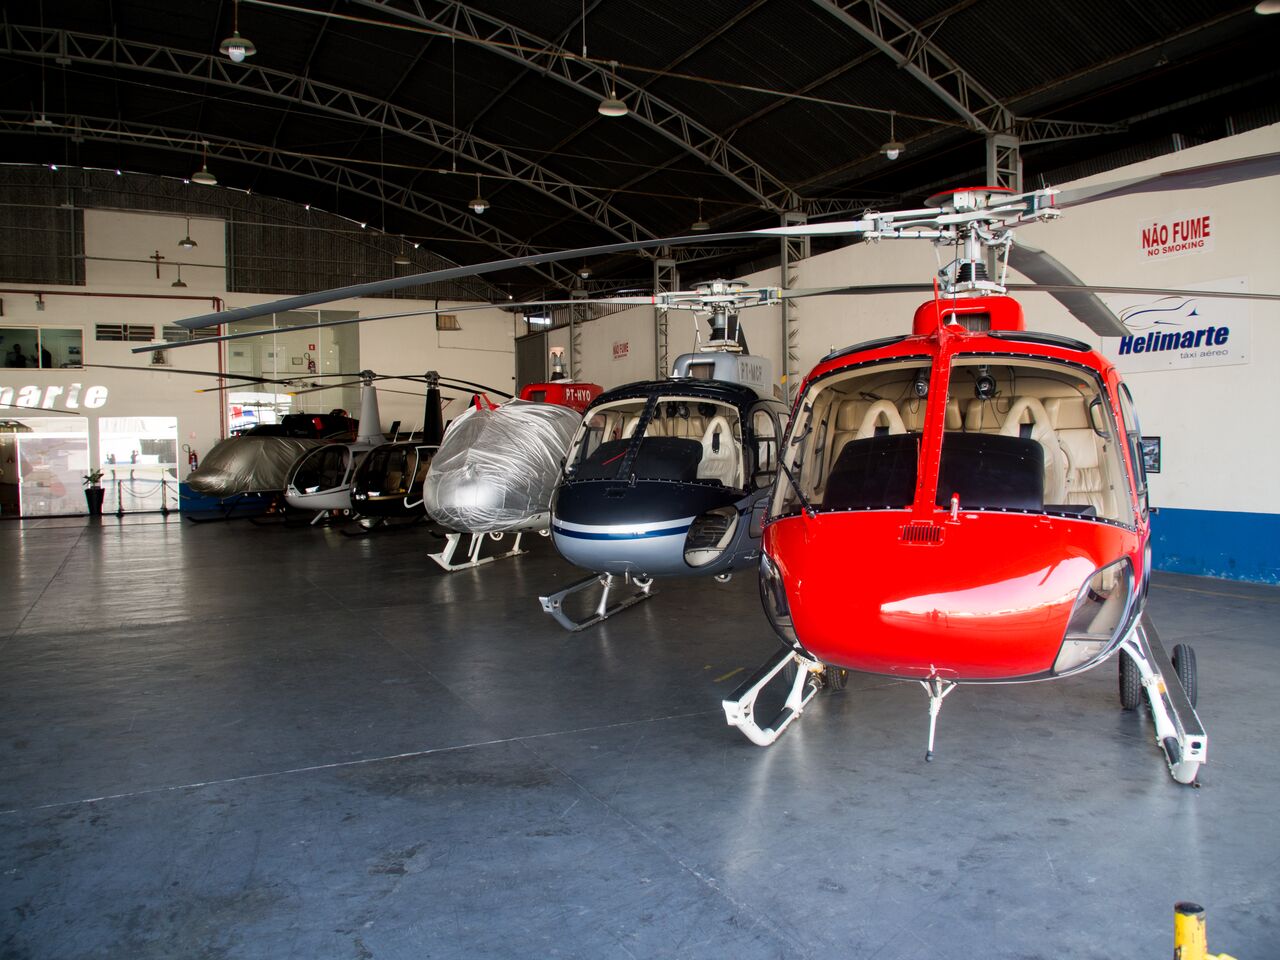 Demand for helicopter taxis has plunged. Photo: Heriberto Araújo 